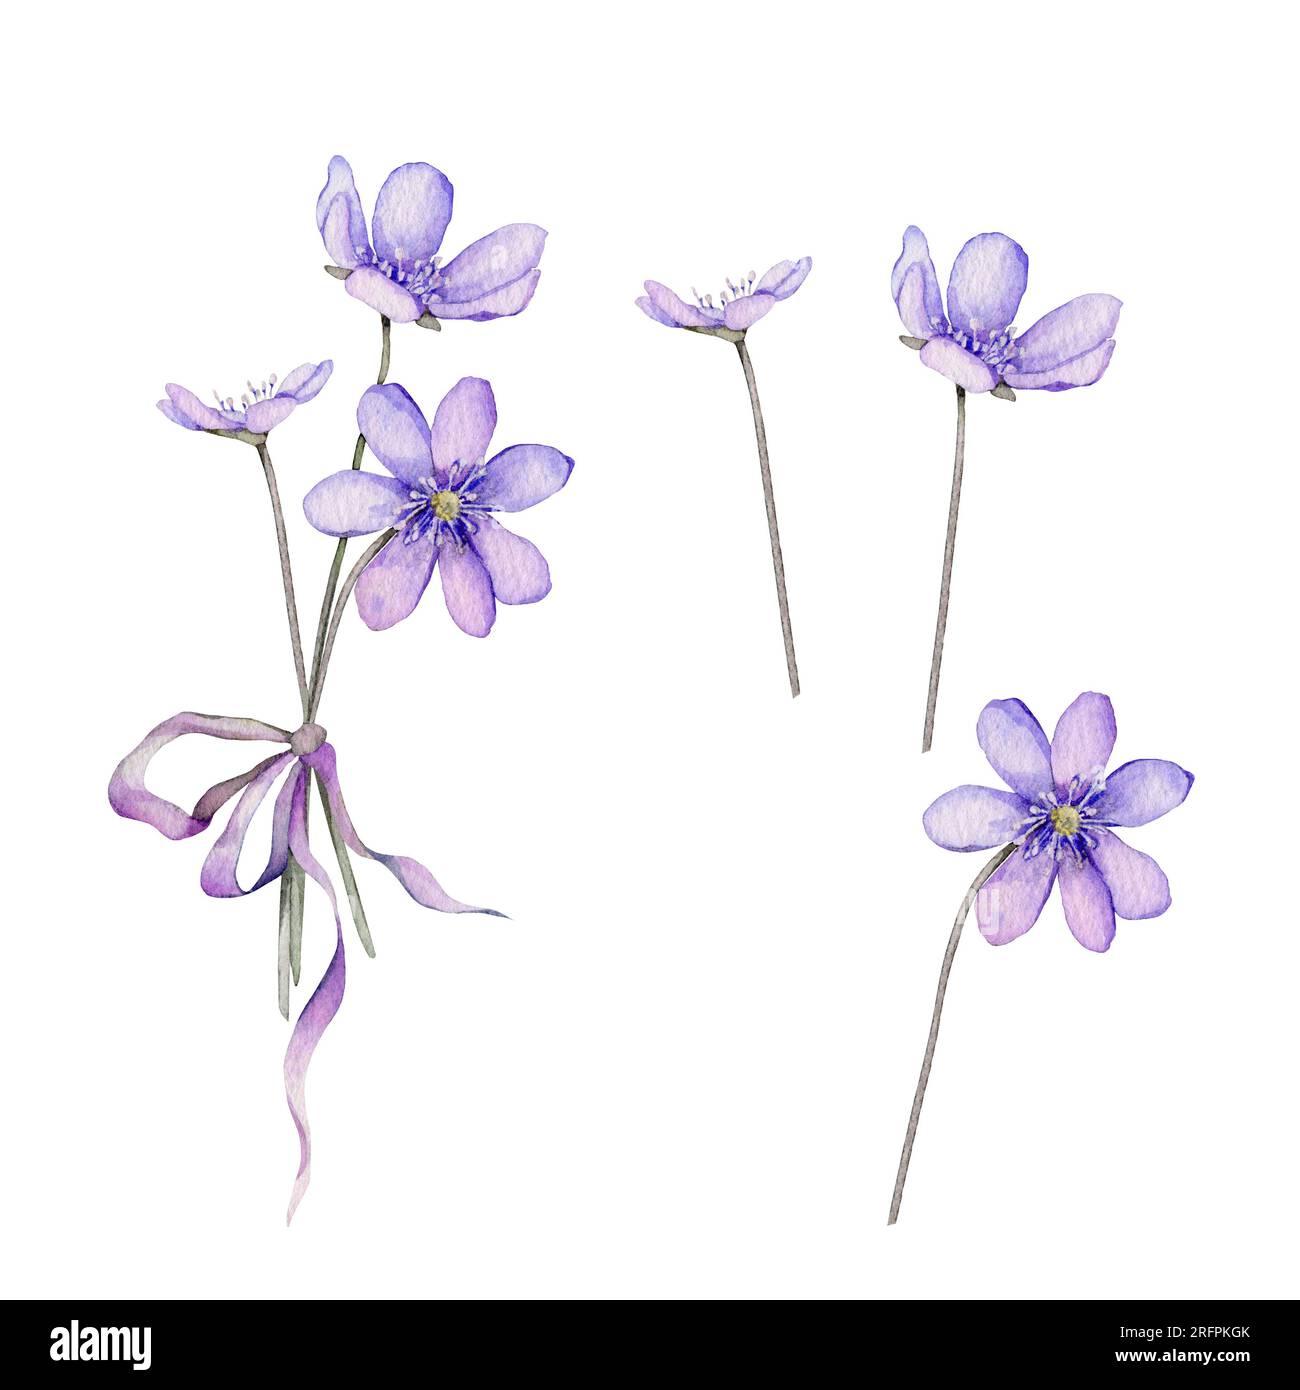 Watercolor spring flowers isolated on white background. Scilla. Coppice, hepatica - first spring flowers. Illustration of delicate lilac flowers Stock Photo